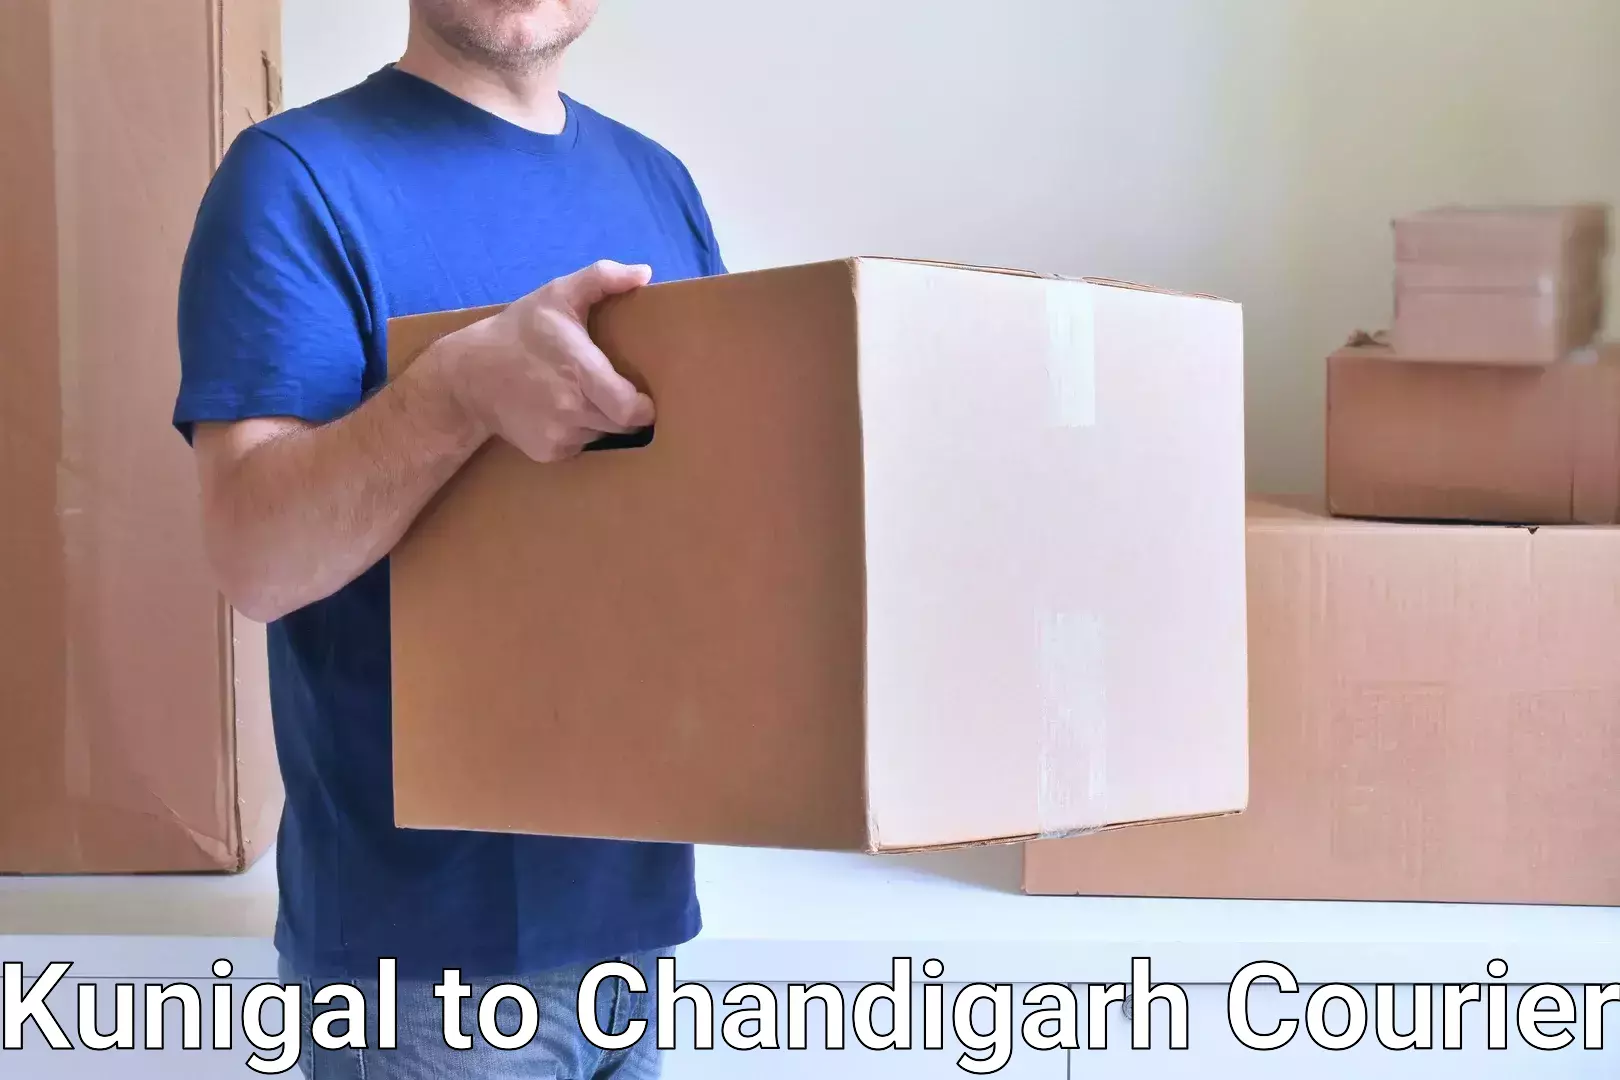 Full-service courier options Kunigal to Chandigarh